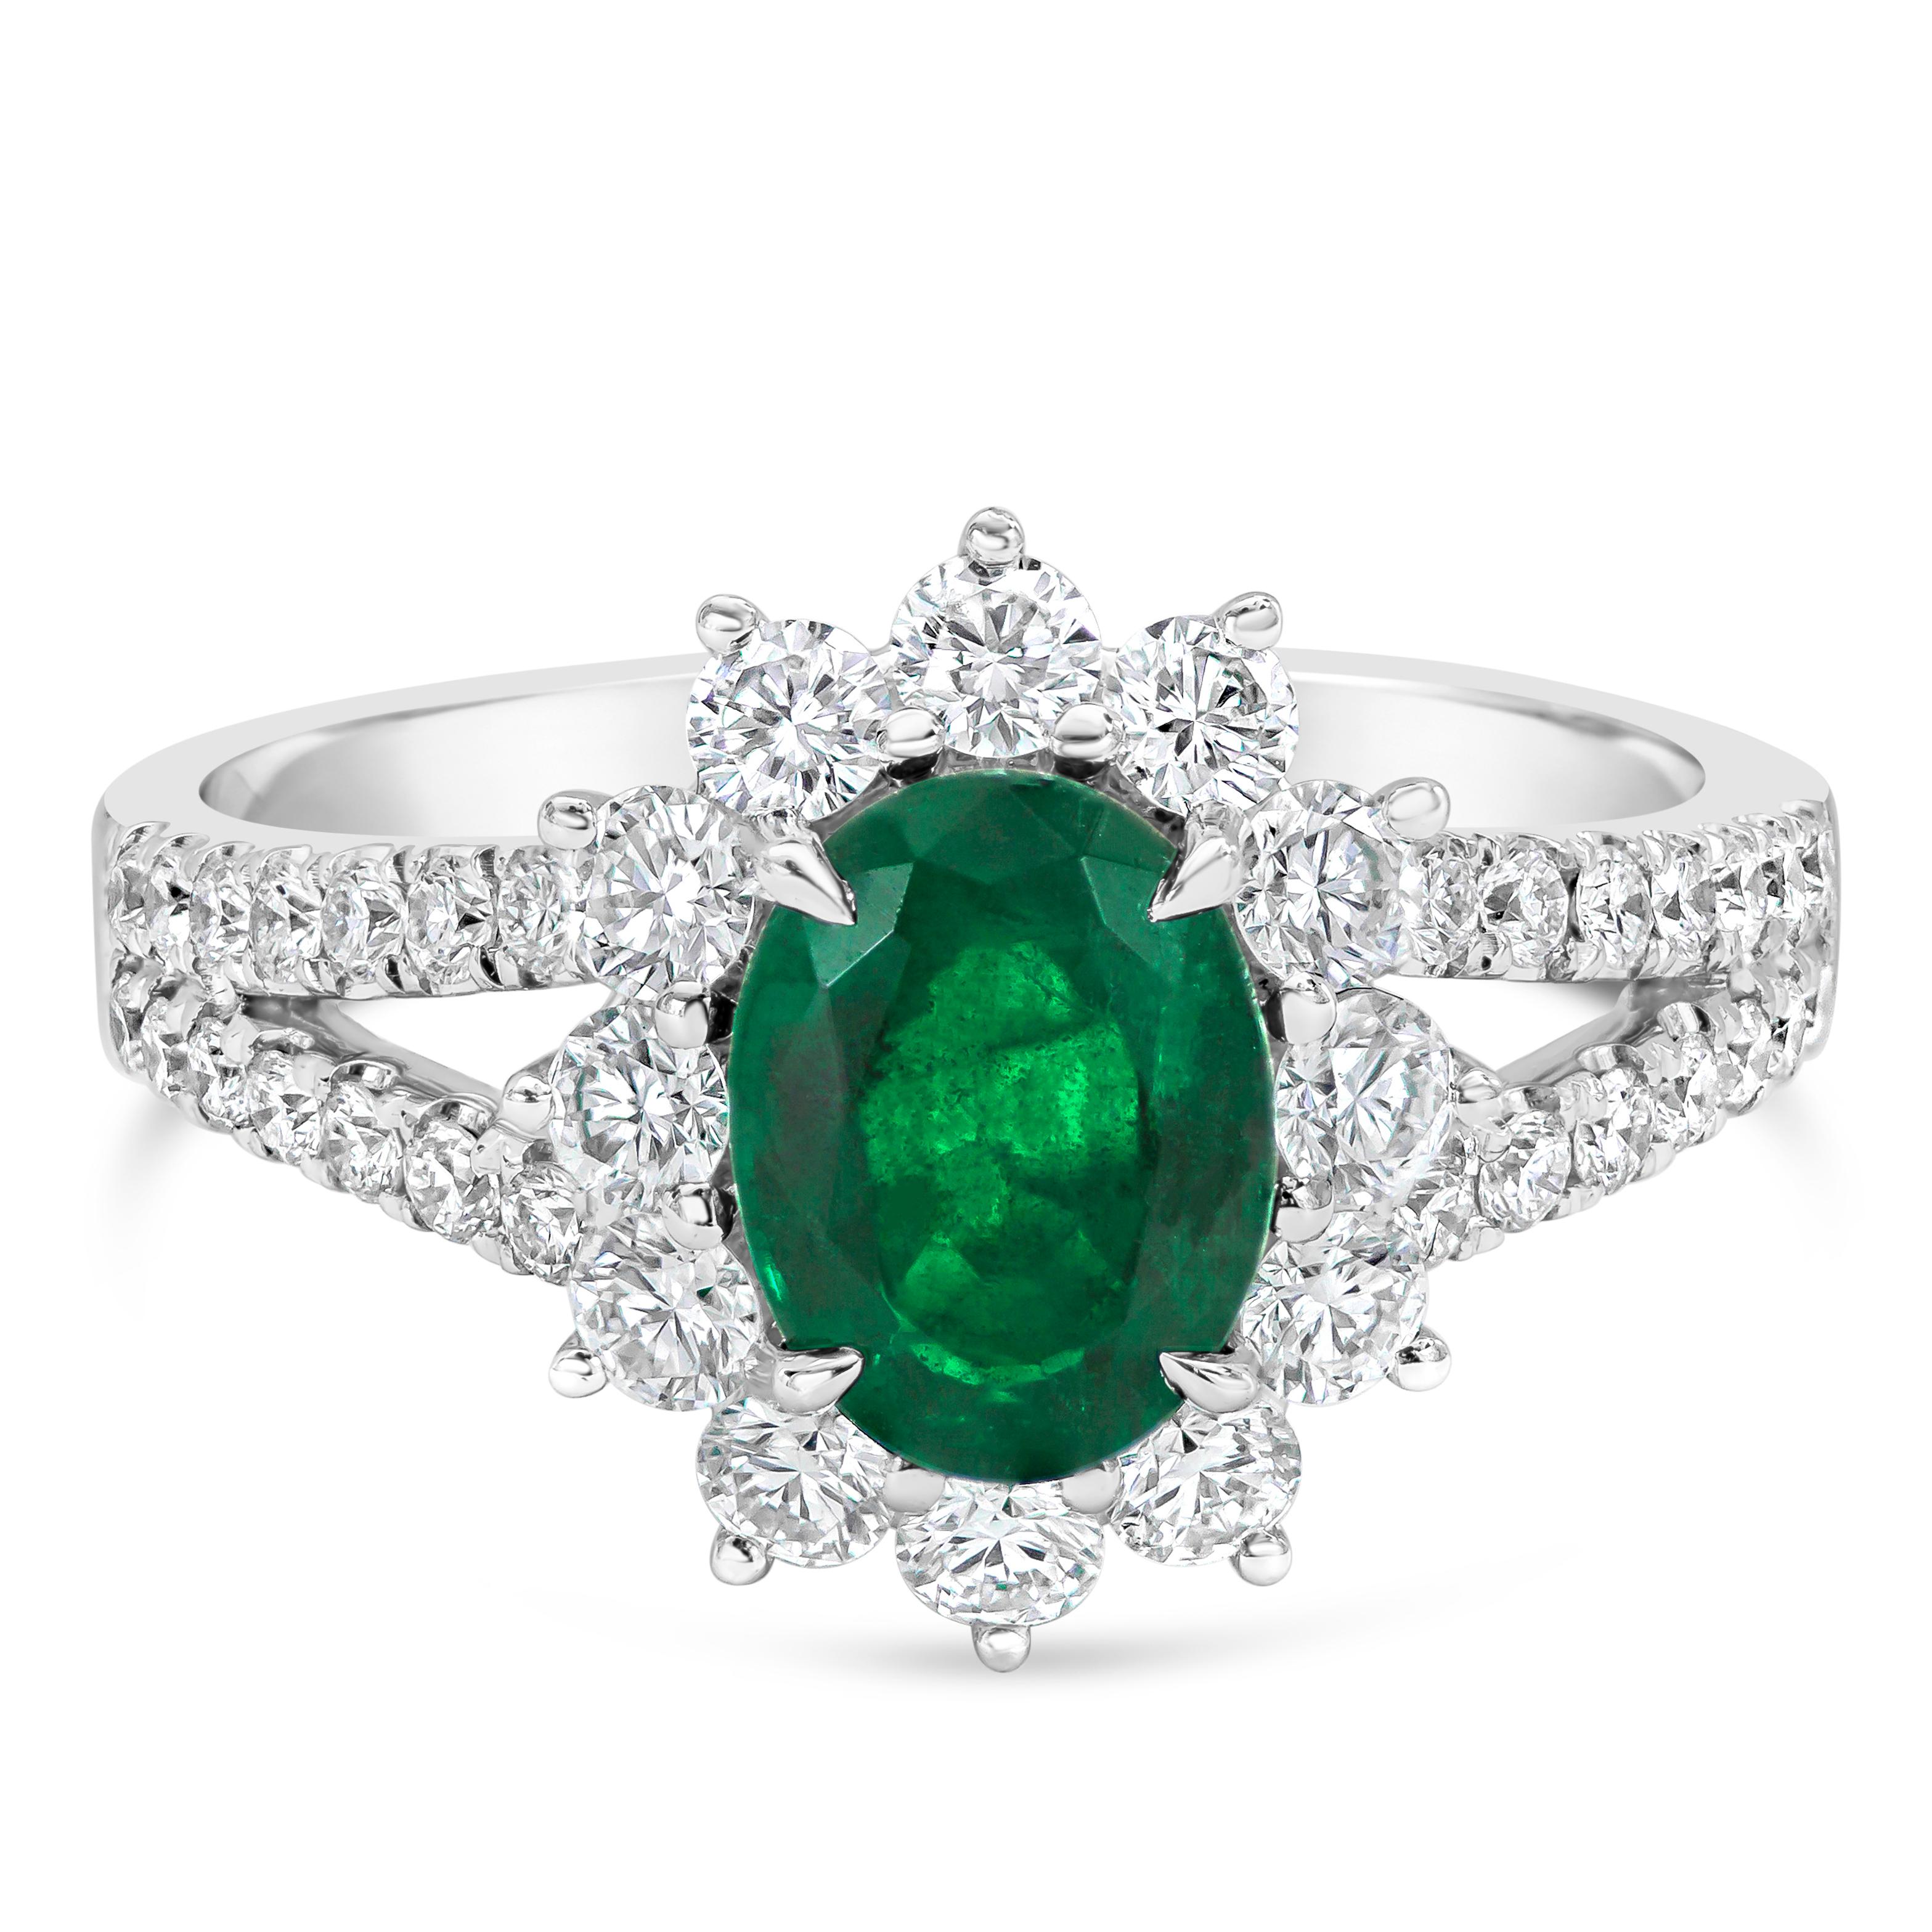 A stunning and color-rich engagement ring, featuring a 1.17 carats oval cut green emerald that embodies calmness and everlasting love. Surrounded by a beautiful halo of round cut diamonds that continue on to a split-shank in a half infinity setting,